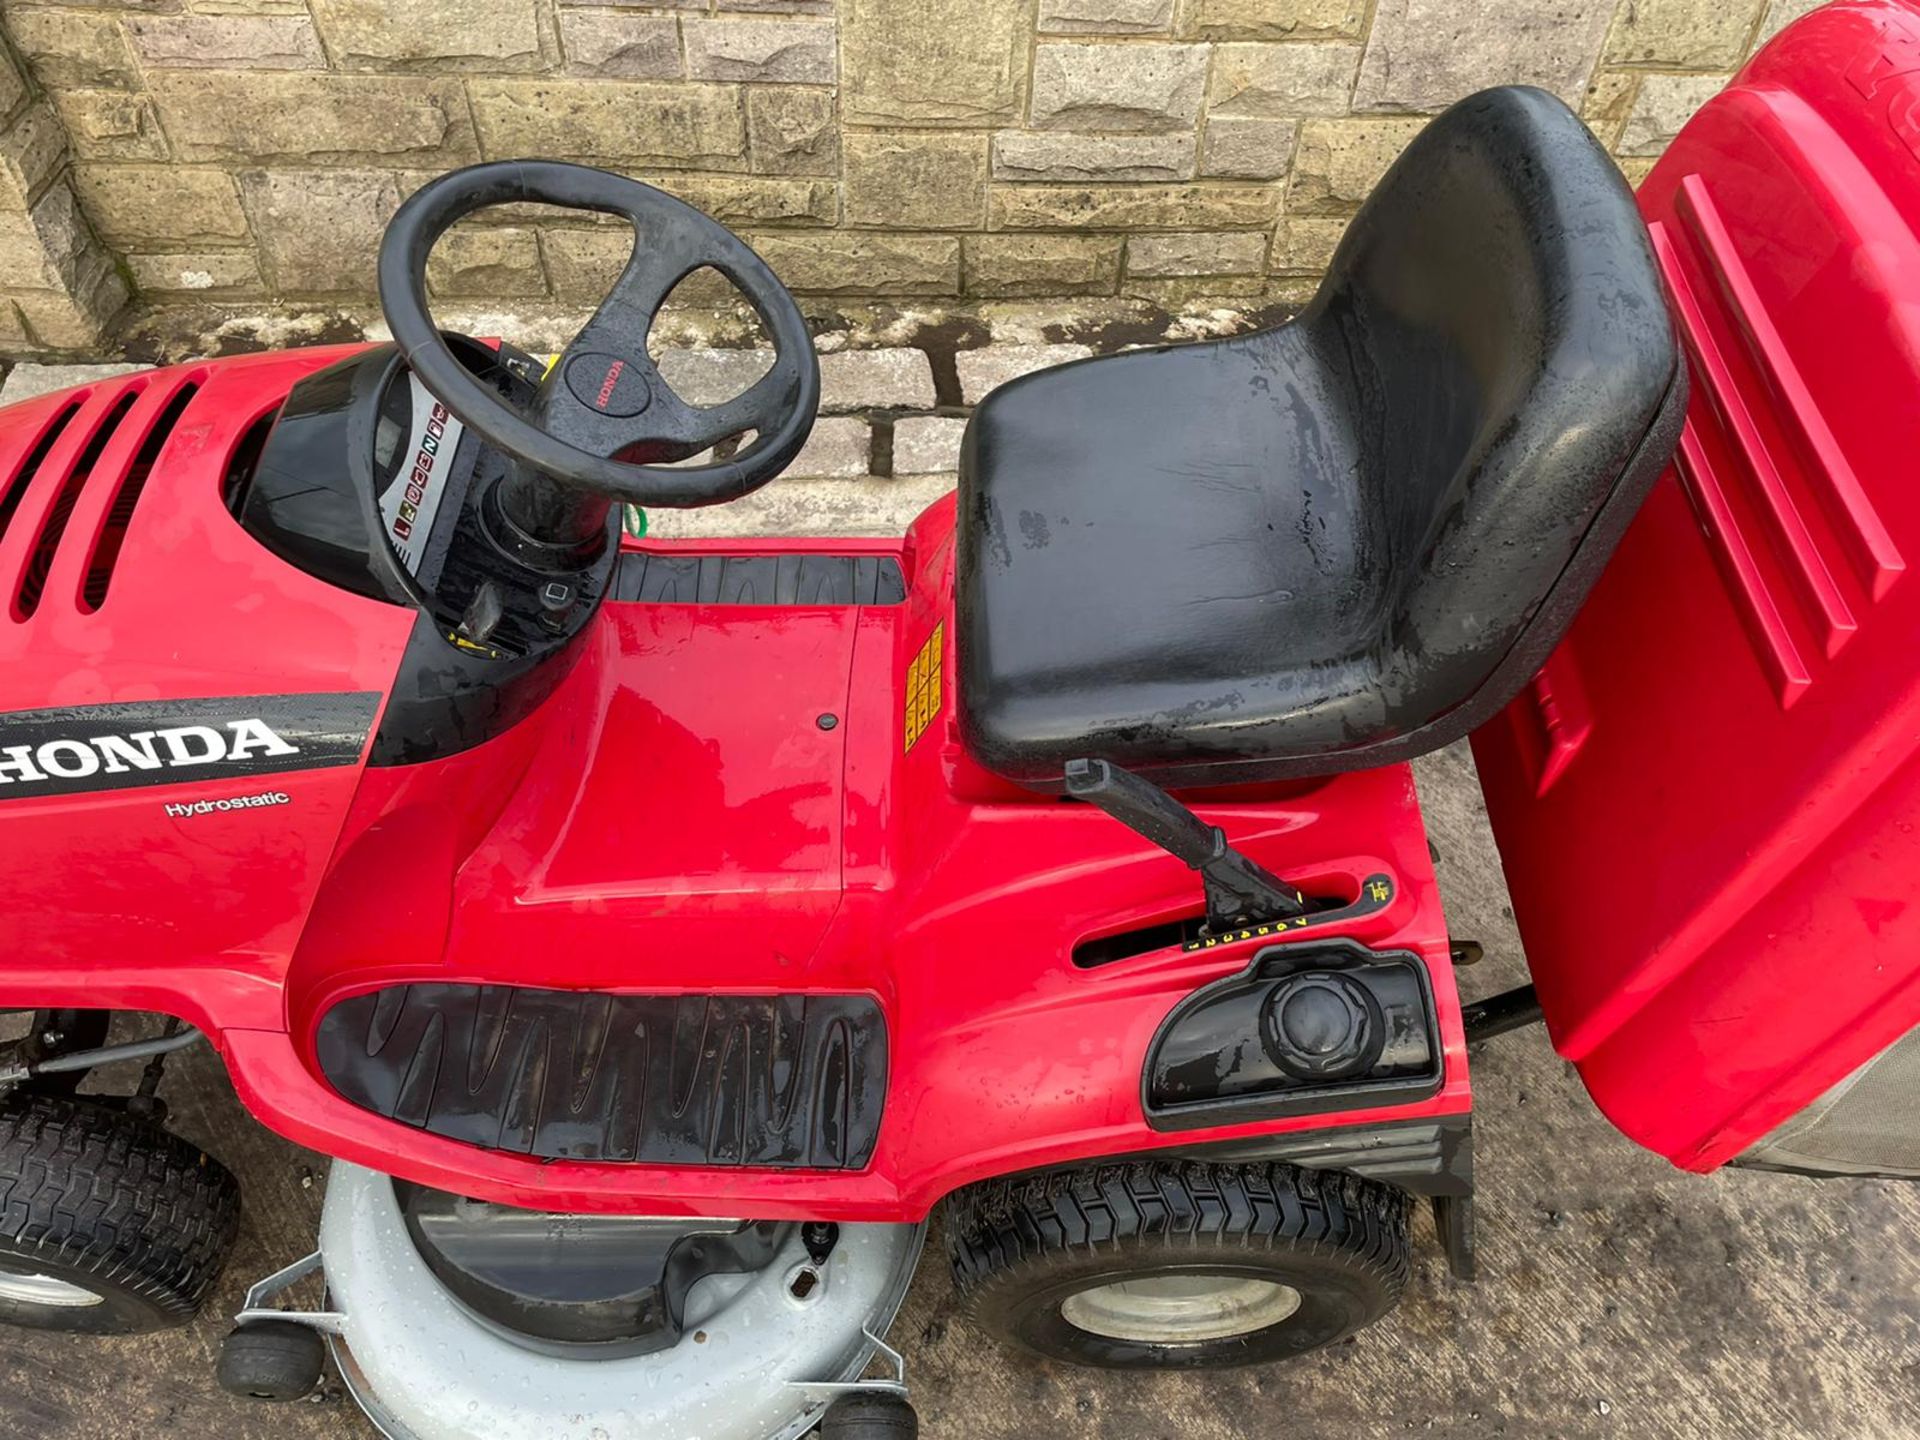 HONDA 2620 V TWIN RIDE ON MOWER, RUNS, DRIVES AND CUTS, CLEAN MACHINE, ELECTRIC COLLECTOR *NO VAT* - Image 4 of 7